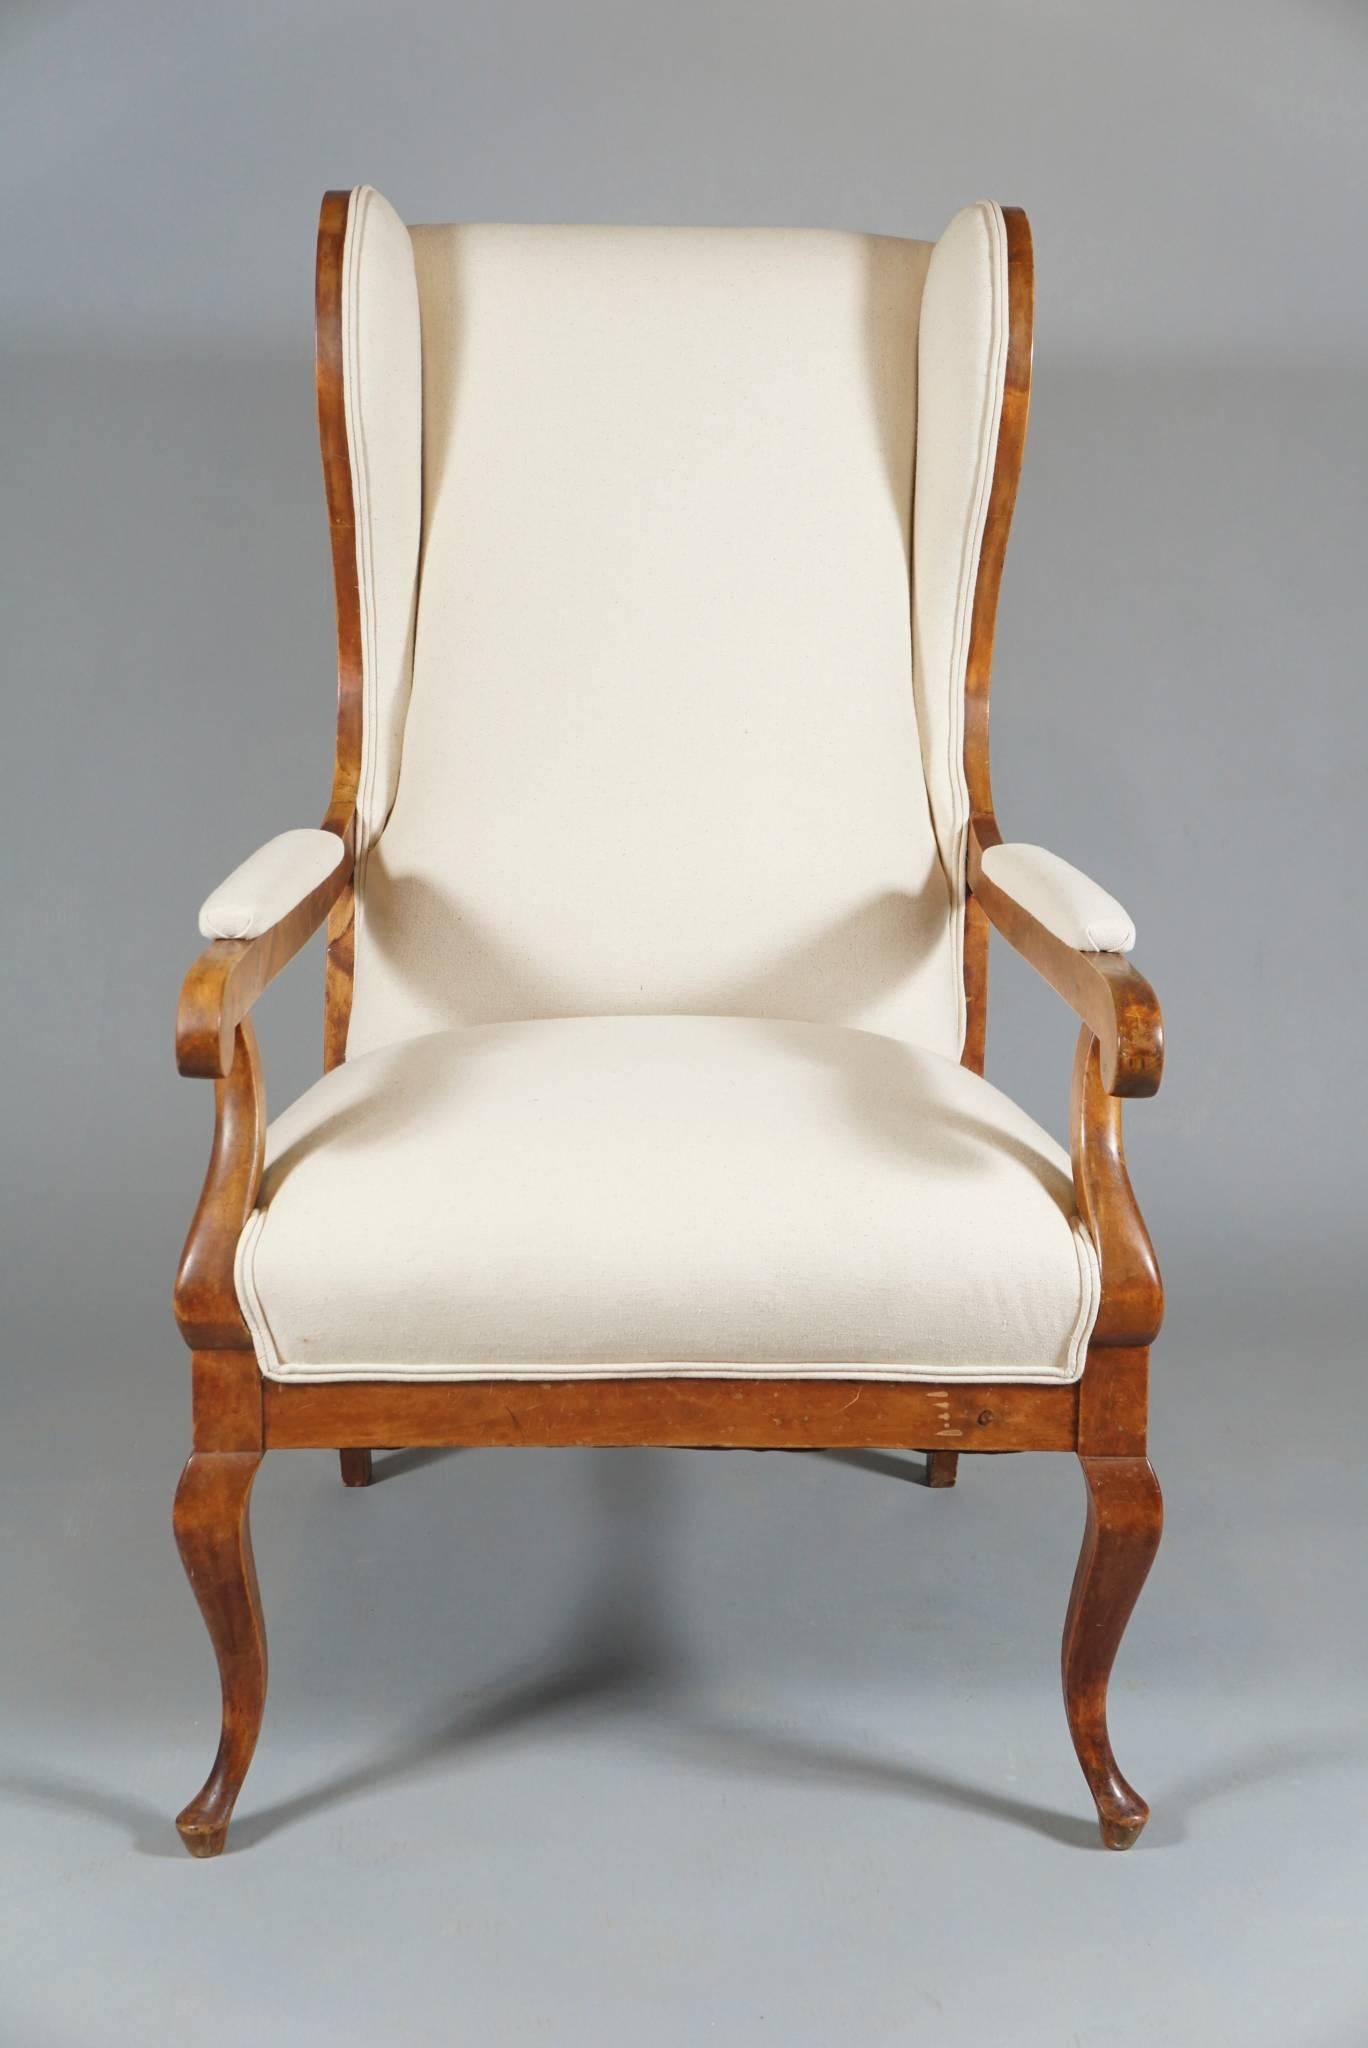 Large single wingback armchair, in birch, with cabriole legs covered in white linen/cotton in a transitional Swedish Biedermeier style.